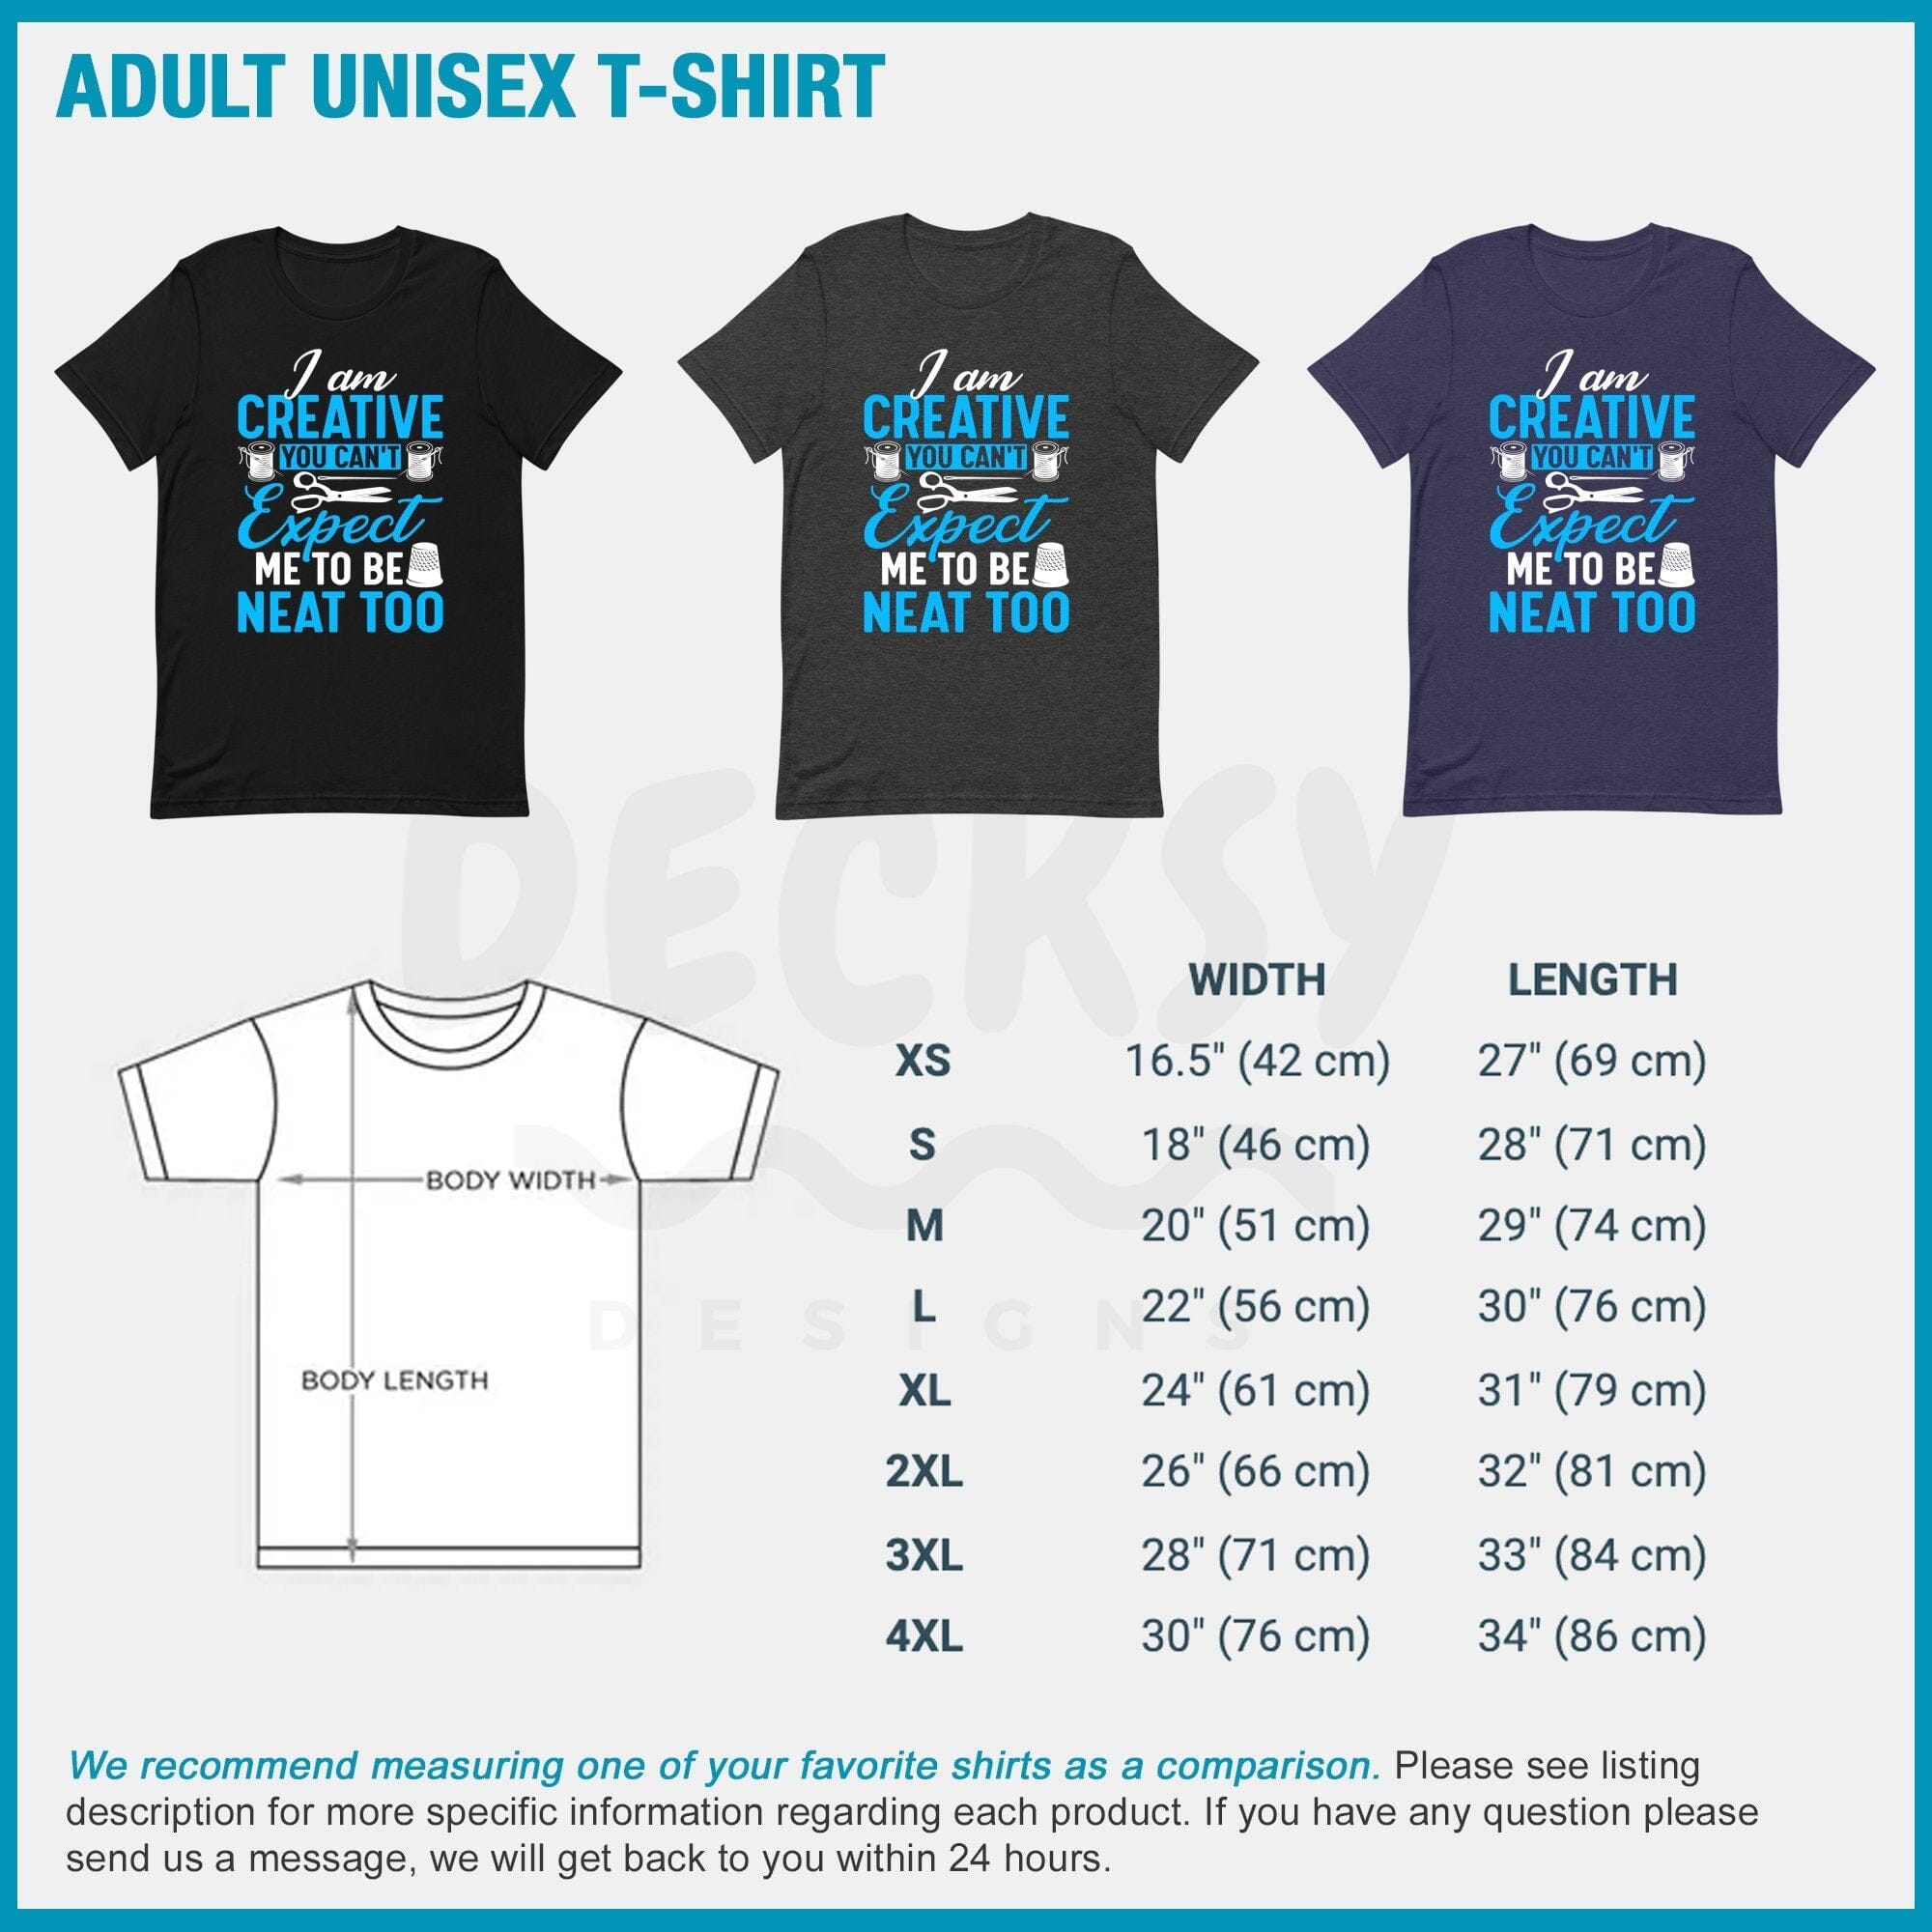 Crafty Shirt, Gift For Artist-Clothing:Gender-Neutral Adult Clothing:Tops & Tees:T-shirts:Graphic Tees-DecksyDesigns